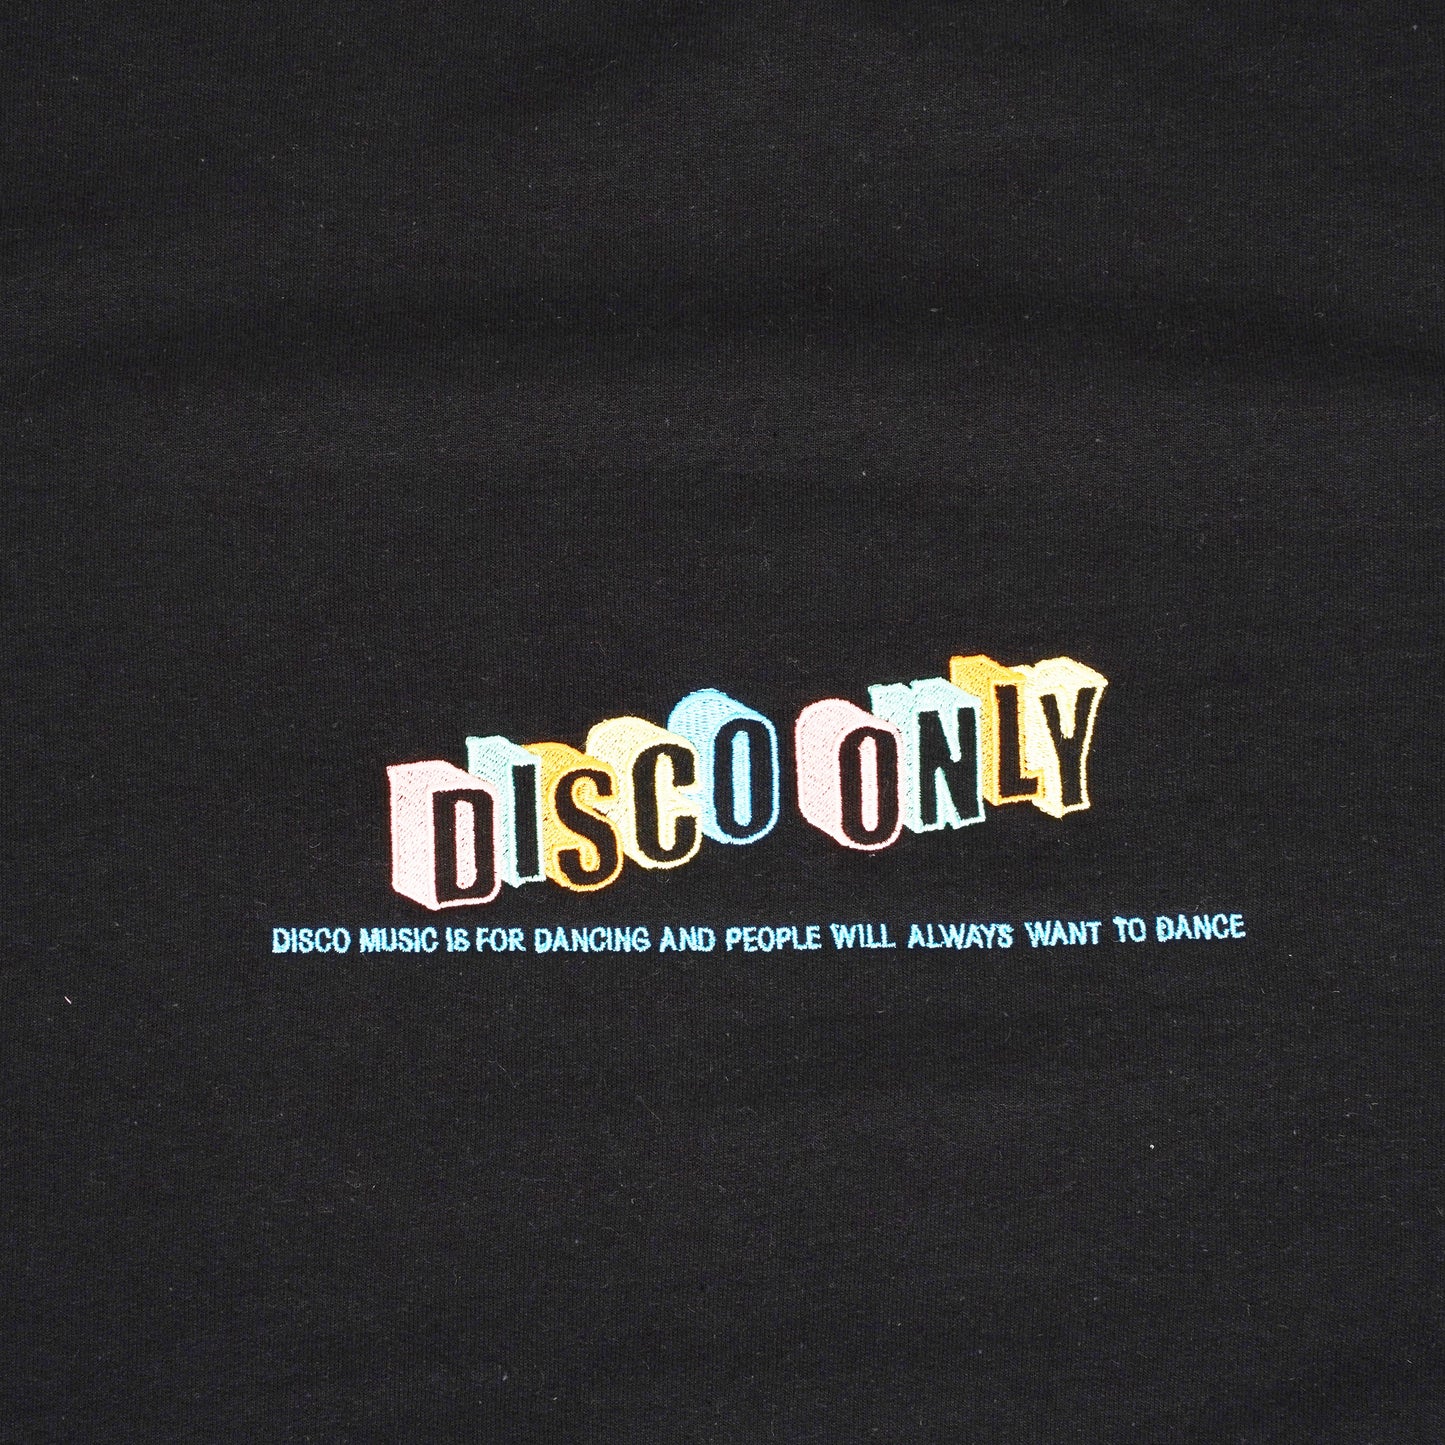 DISCO ONLY 'Dancers' Sweater - Black